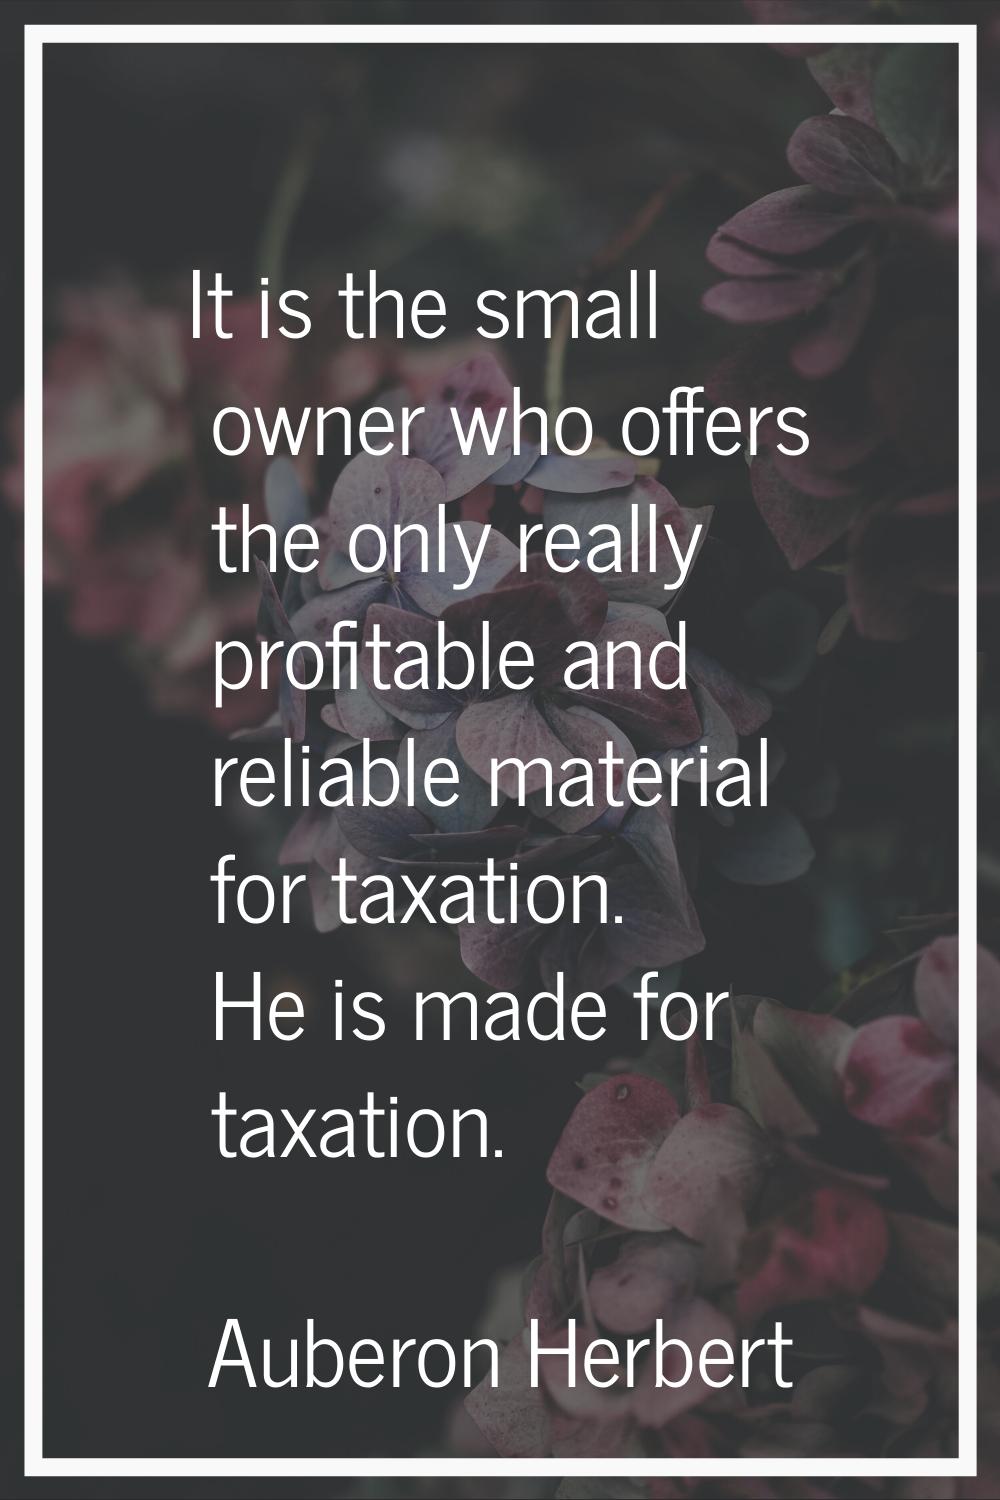 It is the small owner who offers the only really profitable and reliable material for taxation. He 